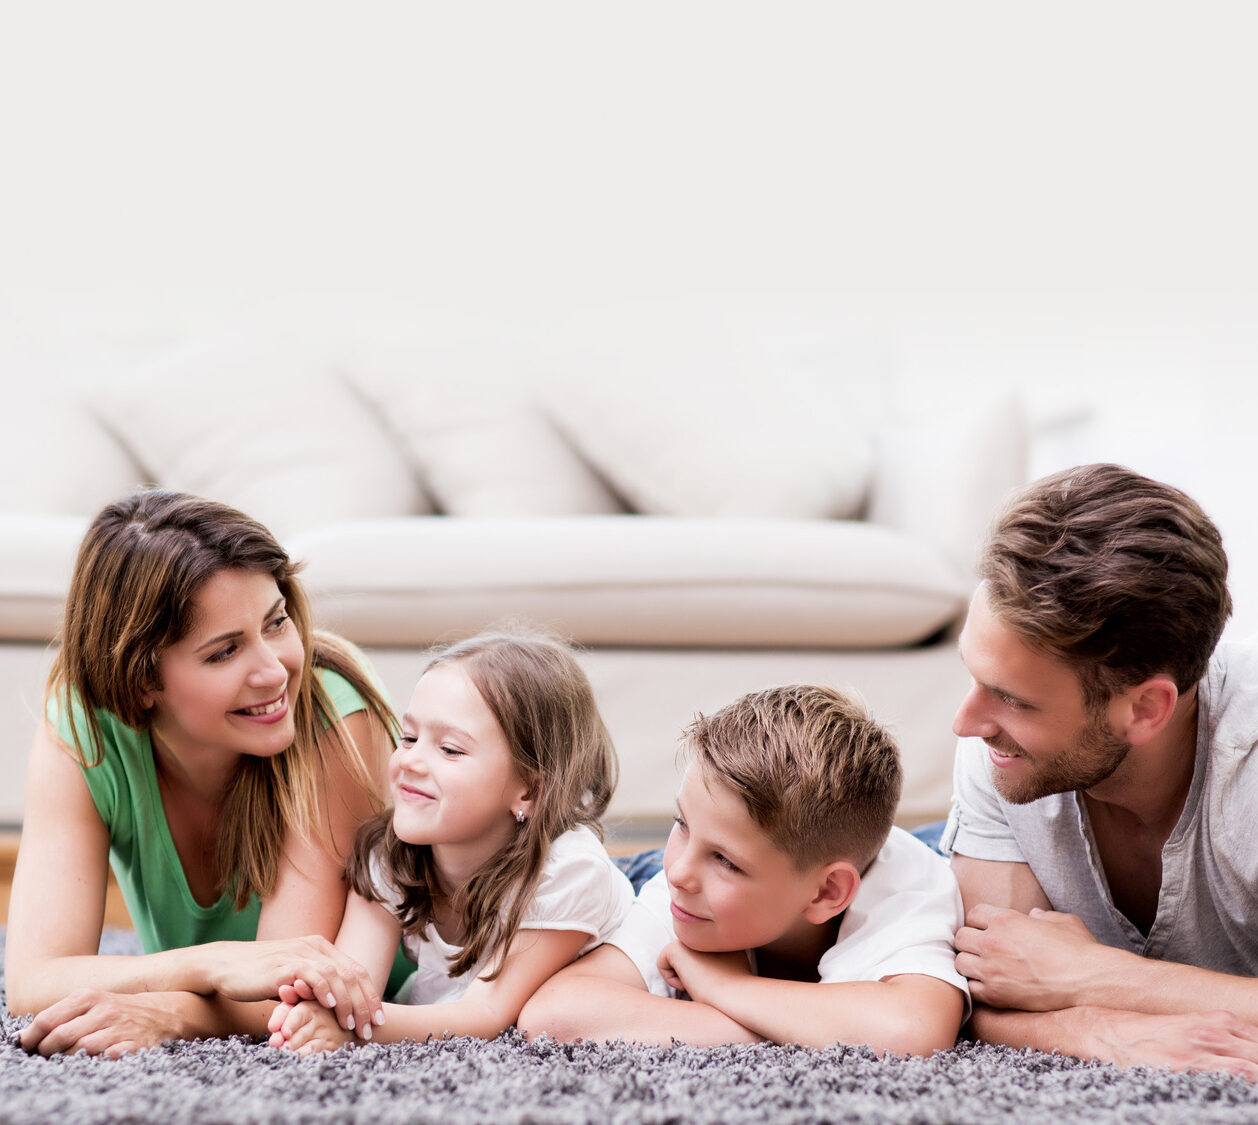 Image of a couple and their two children on a fluffy carpet.